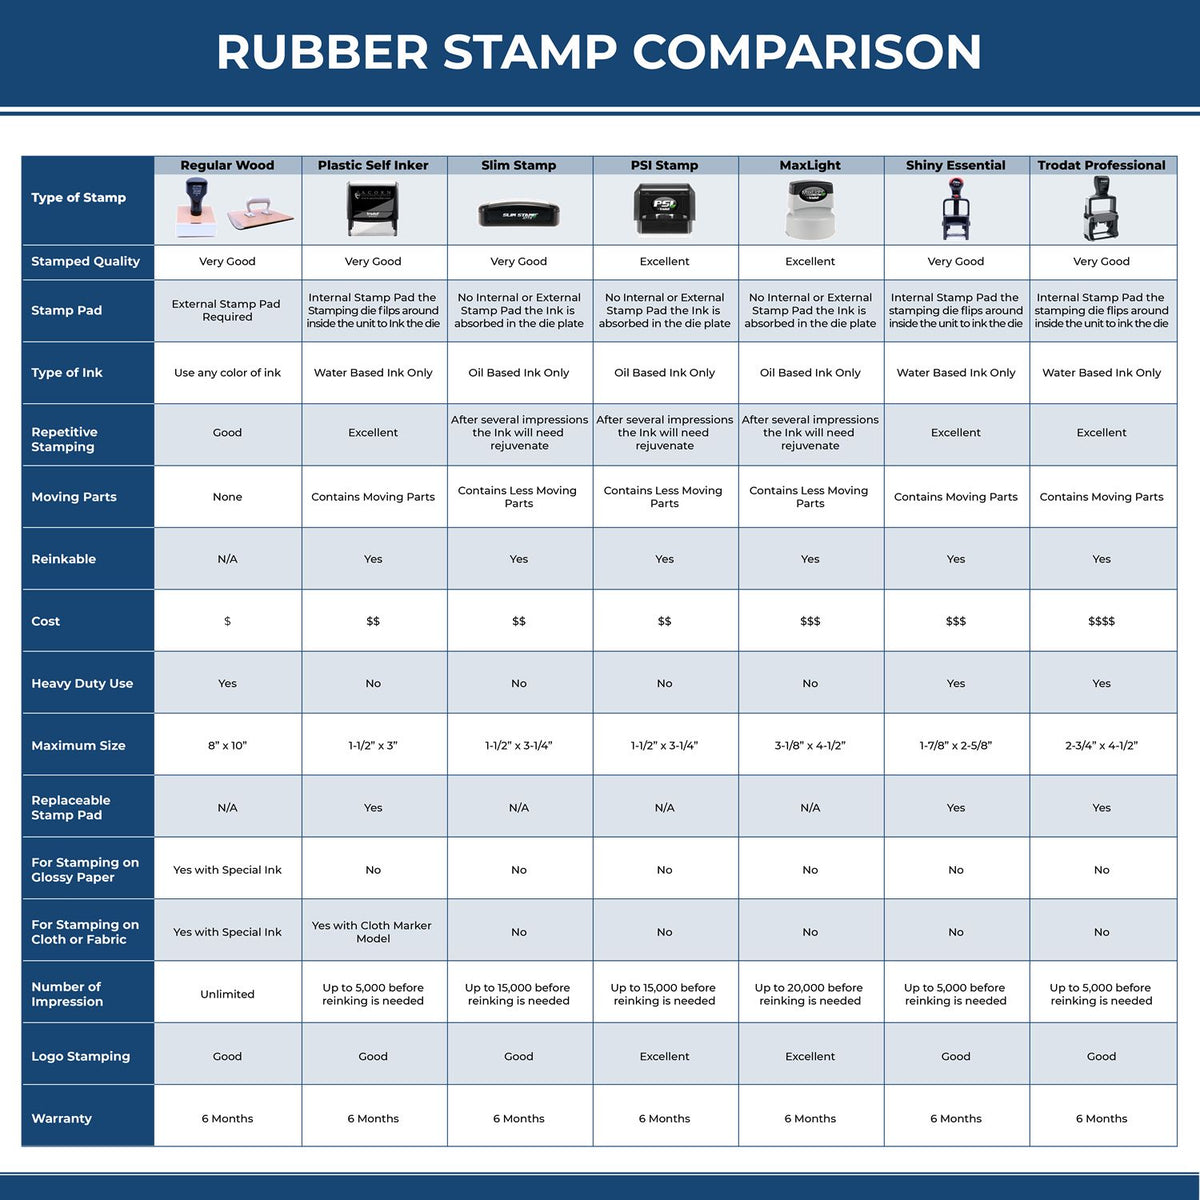 Large Self-Inking Bold Paid Stamp 4947S Rubber Stamp Comparison